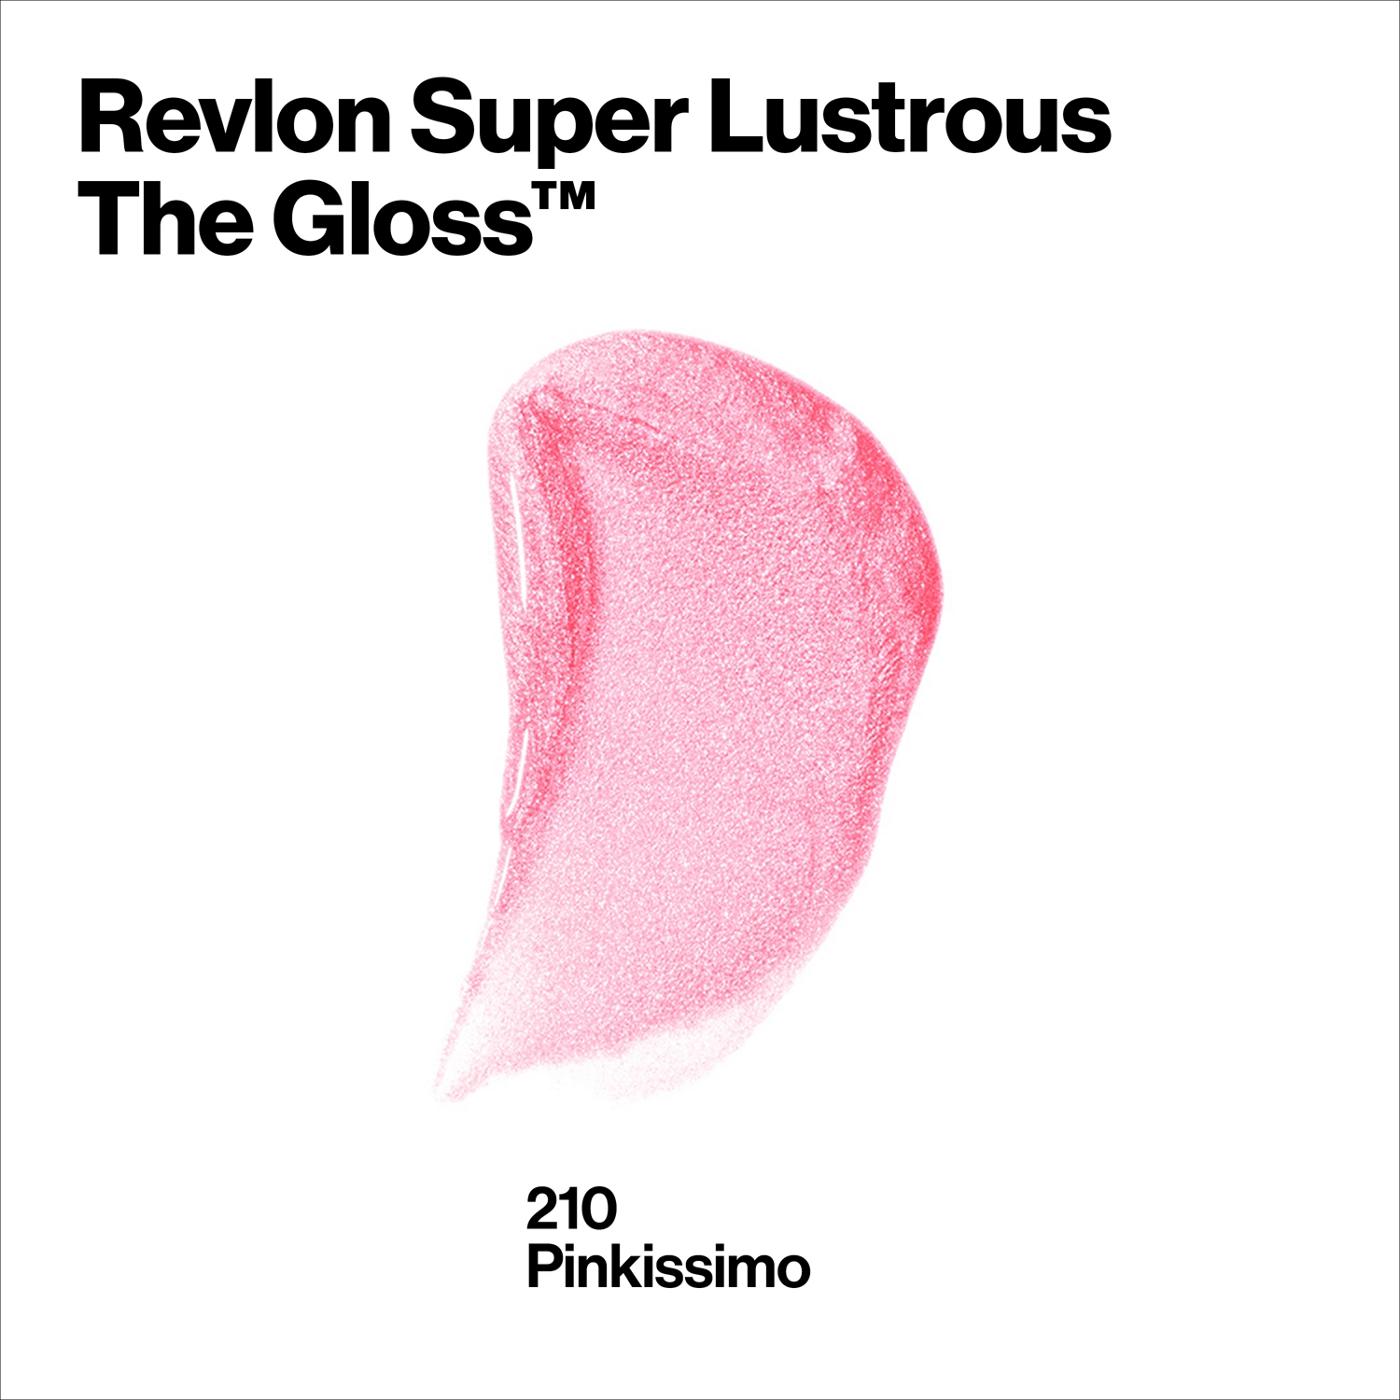 Revlon Super Lustrous The Gloss, 210 Pinkissimo; image 2 of 9